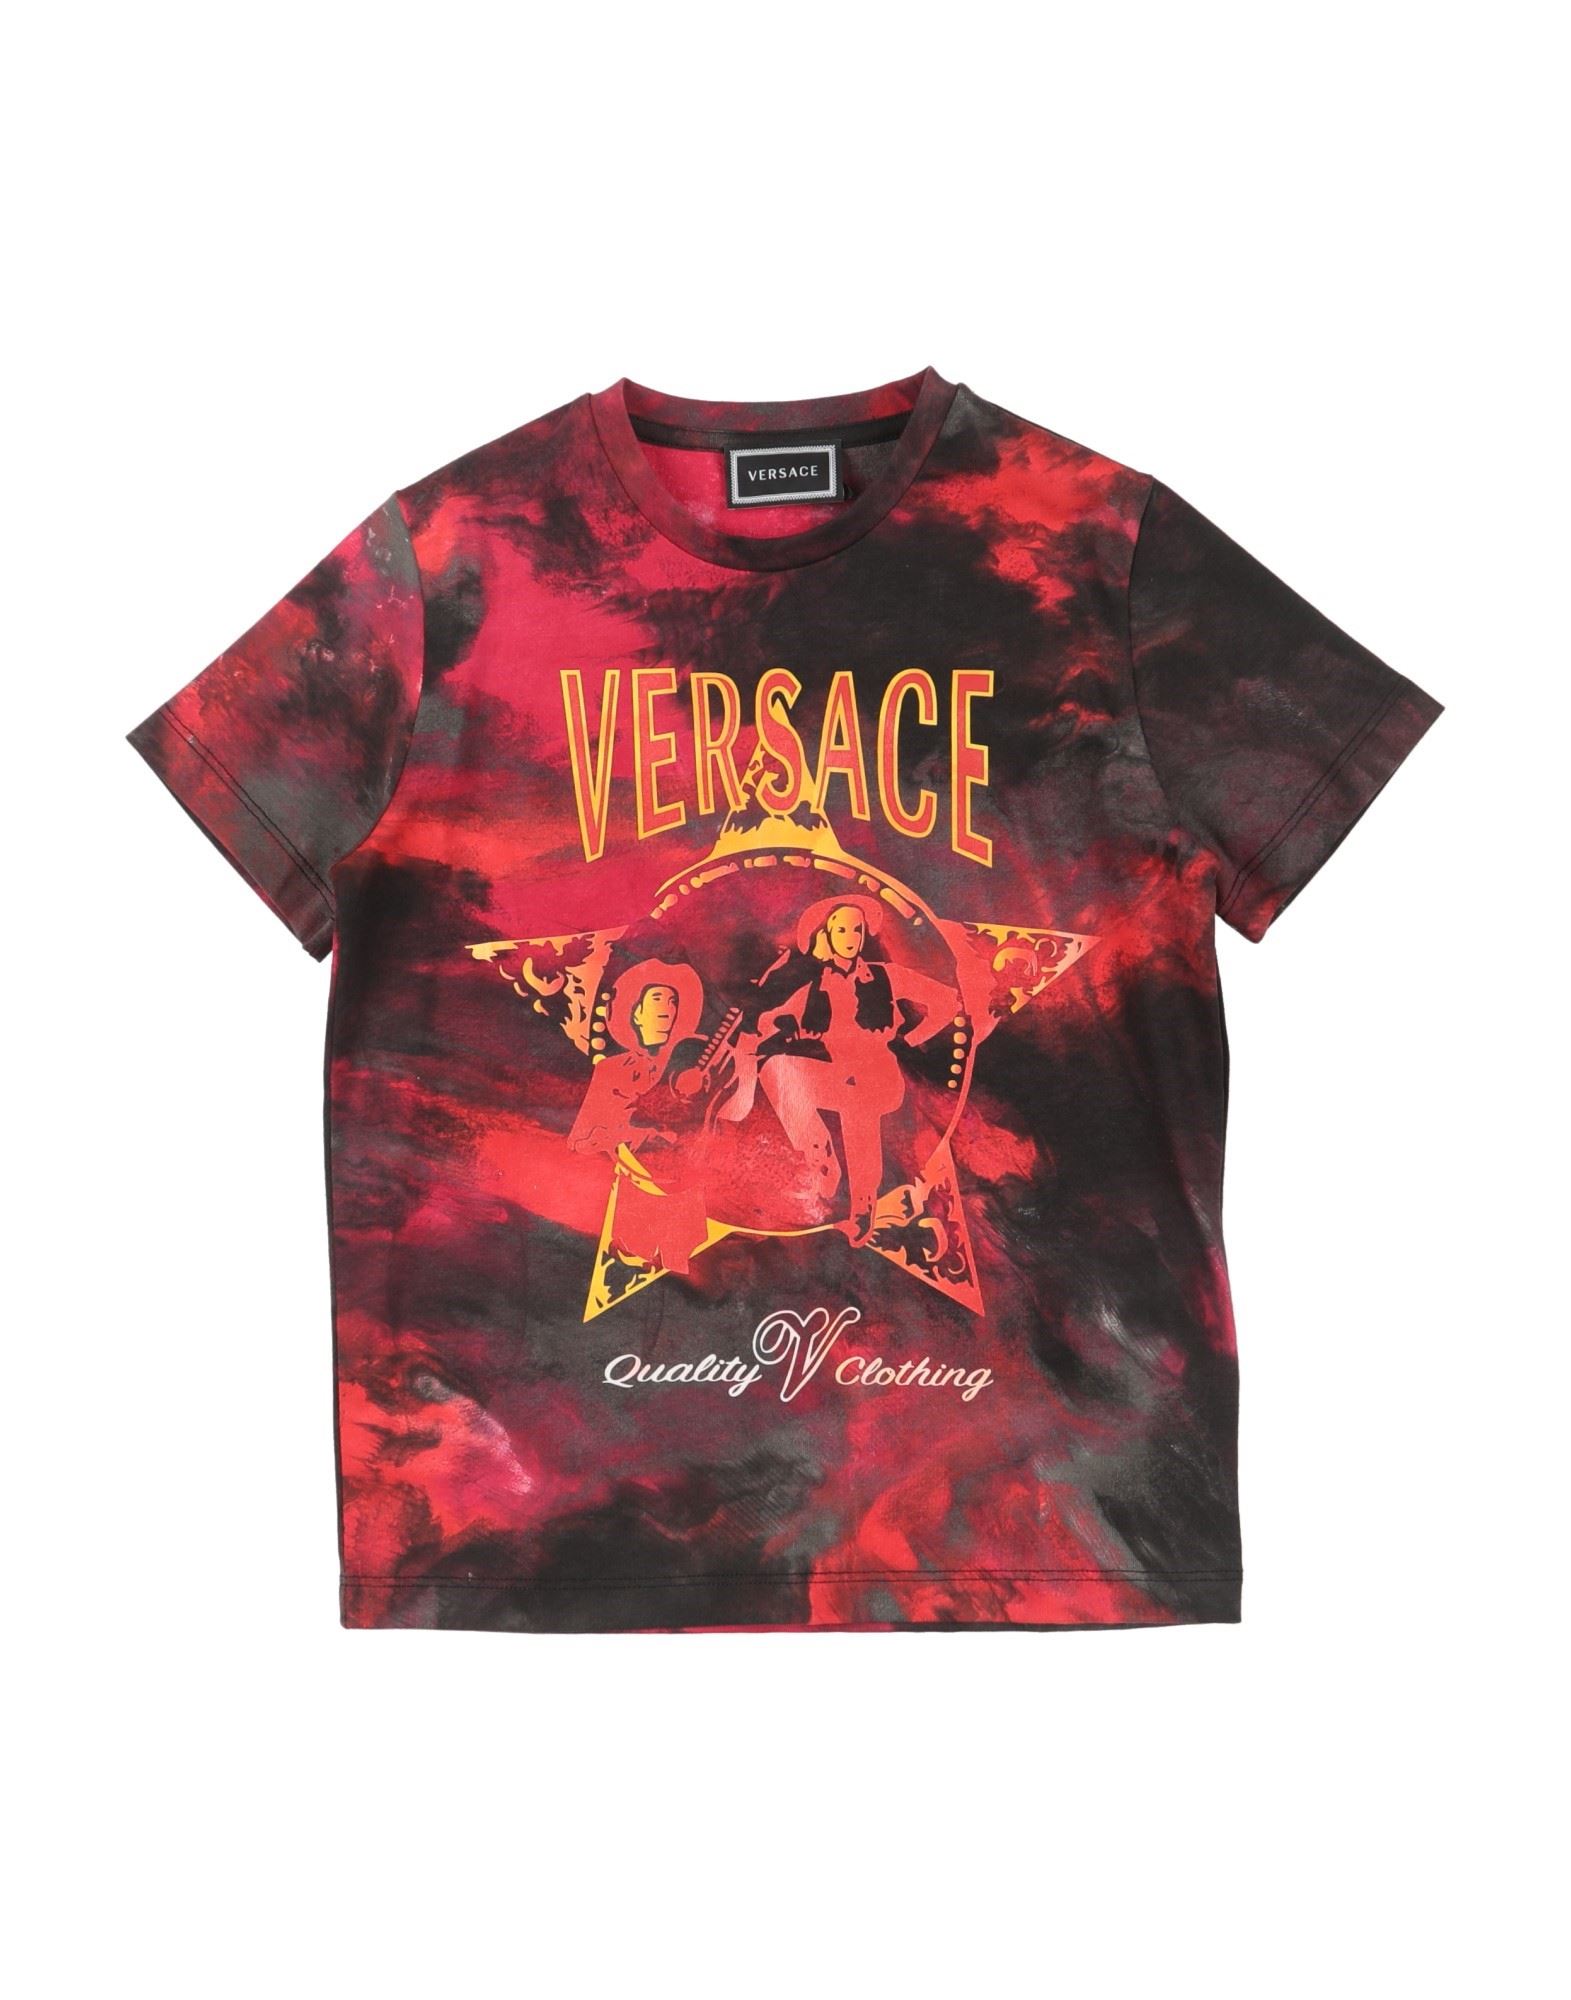 VERSACE YOUNG VERSACE YOUNG T-SHIRTS